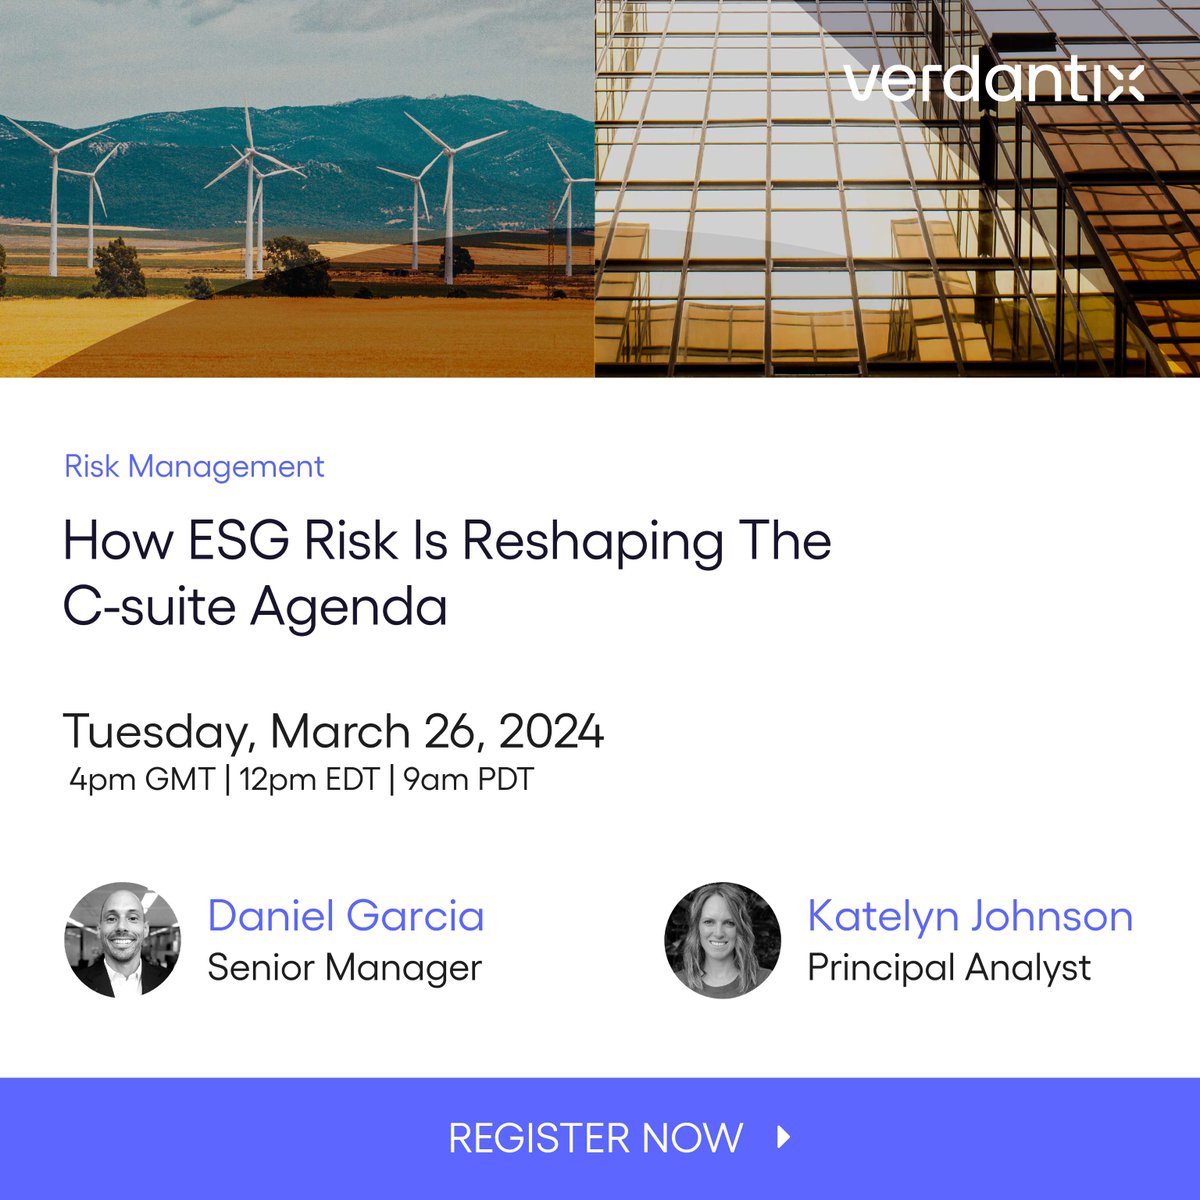 ESG risk: the latest boardroom challenge. Shifting regulations, reputational risks and rising scrutiny are making ESG a top priority for C-suites everywhere. Don't get caught unprepared - join our free webinar 👇 tinyurl.com/7pnsy4jb #RegulatoryCompliance #BusinessRisk